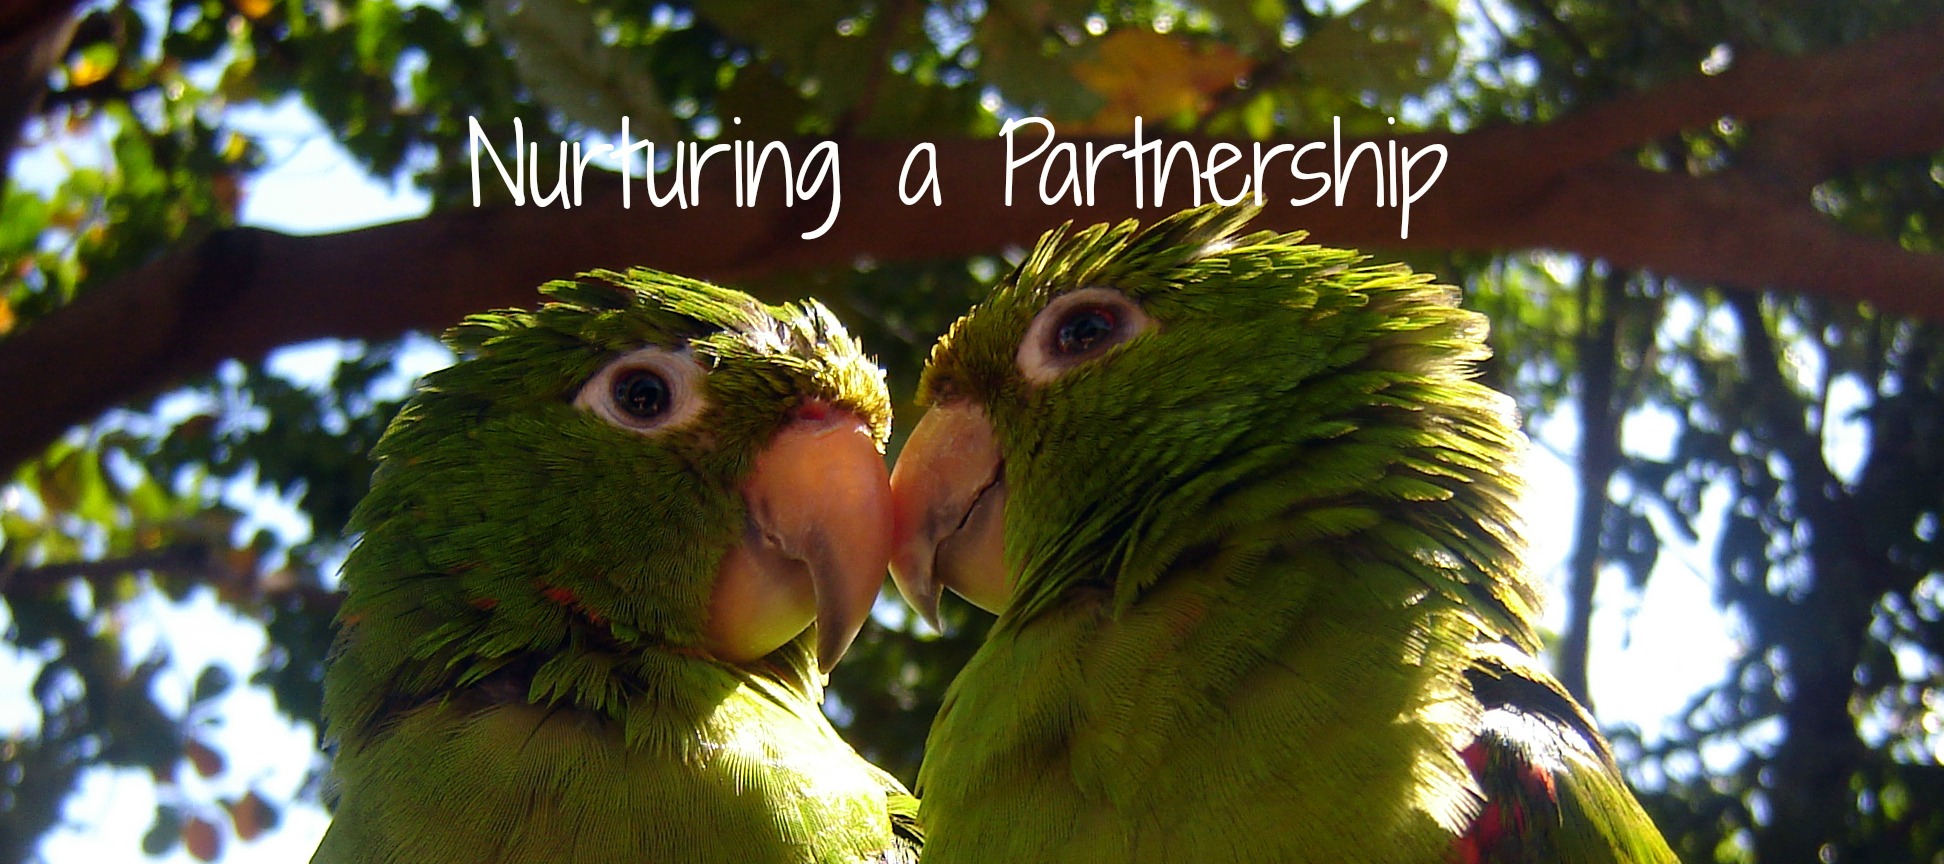 Partnership Therapy - Nurturing a Partnership - Two Parrots with beaks touching